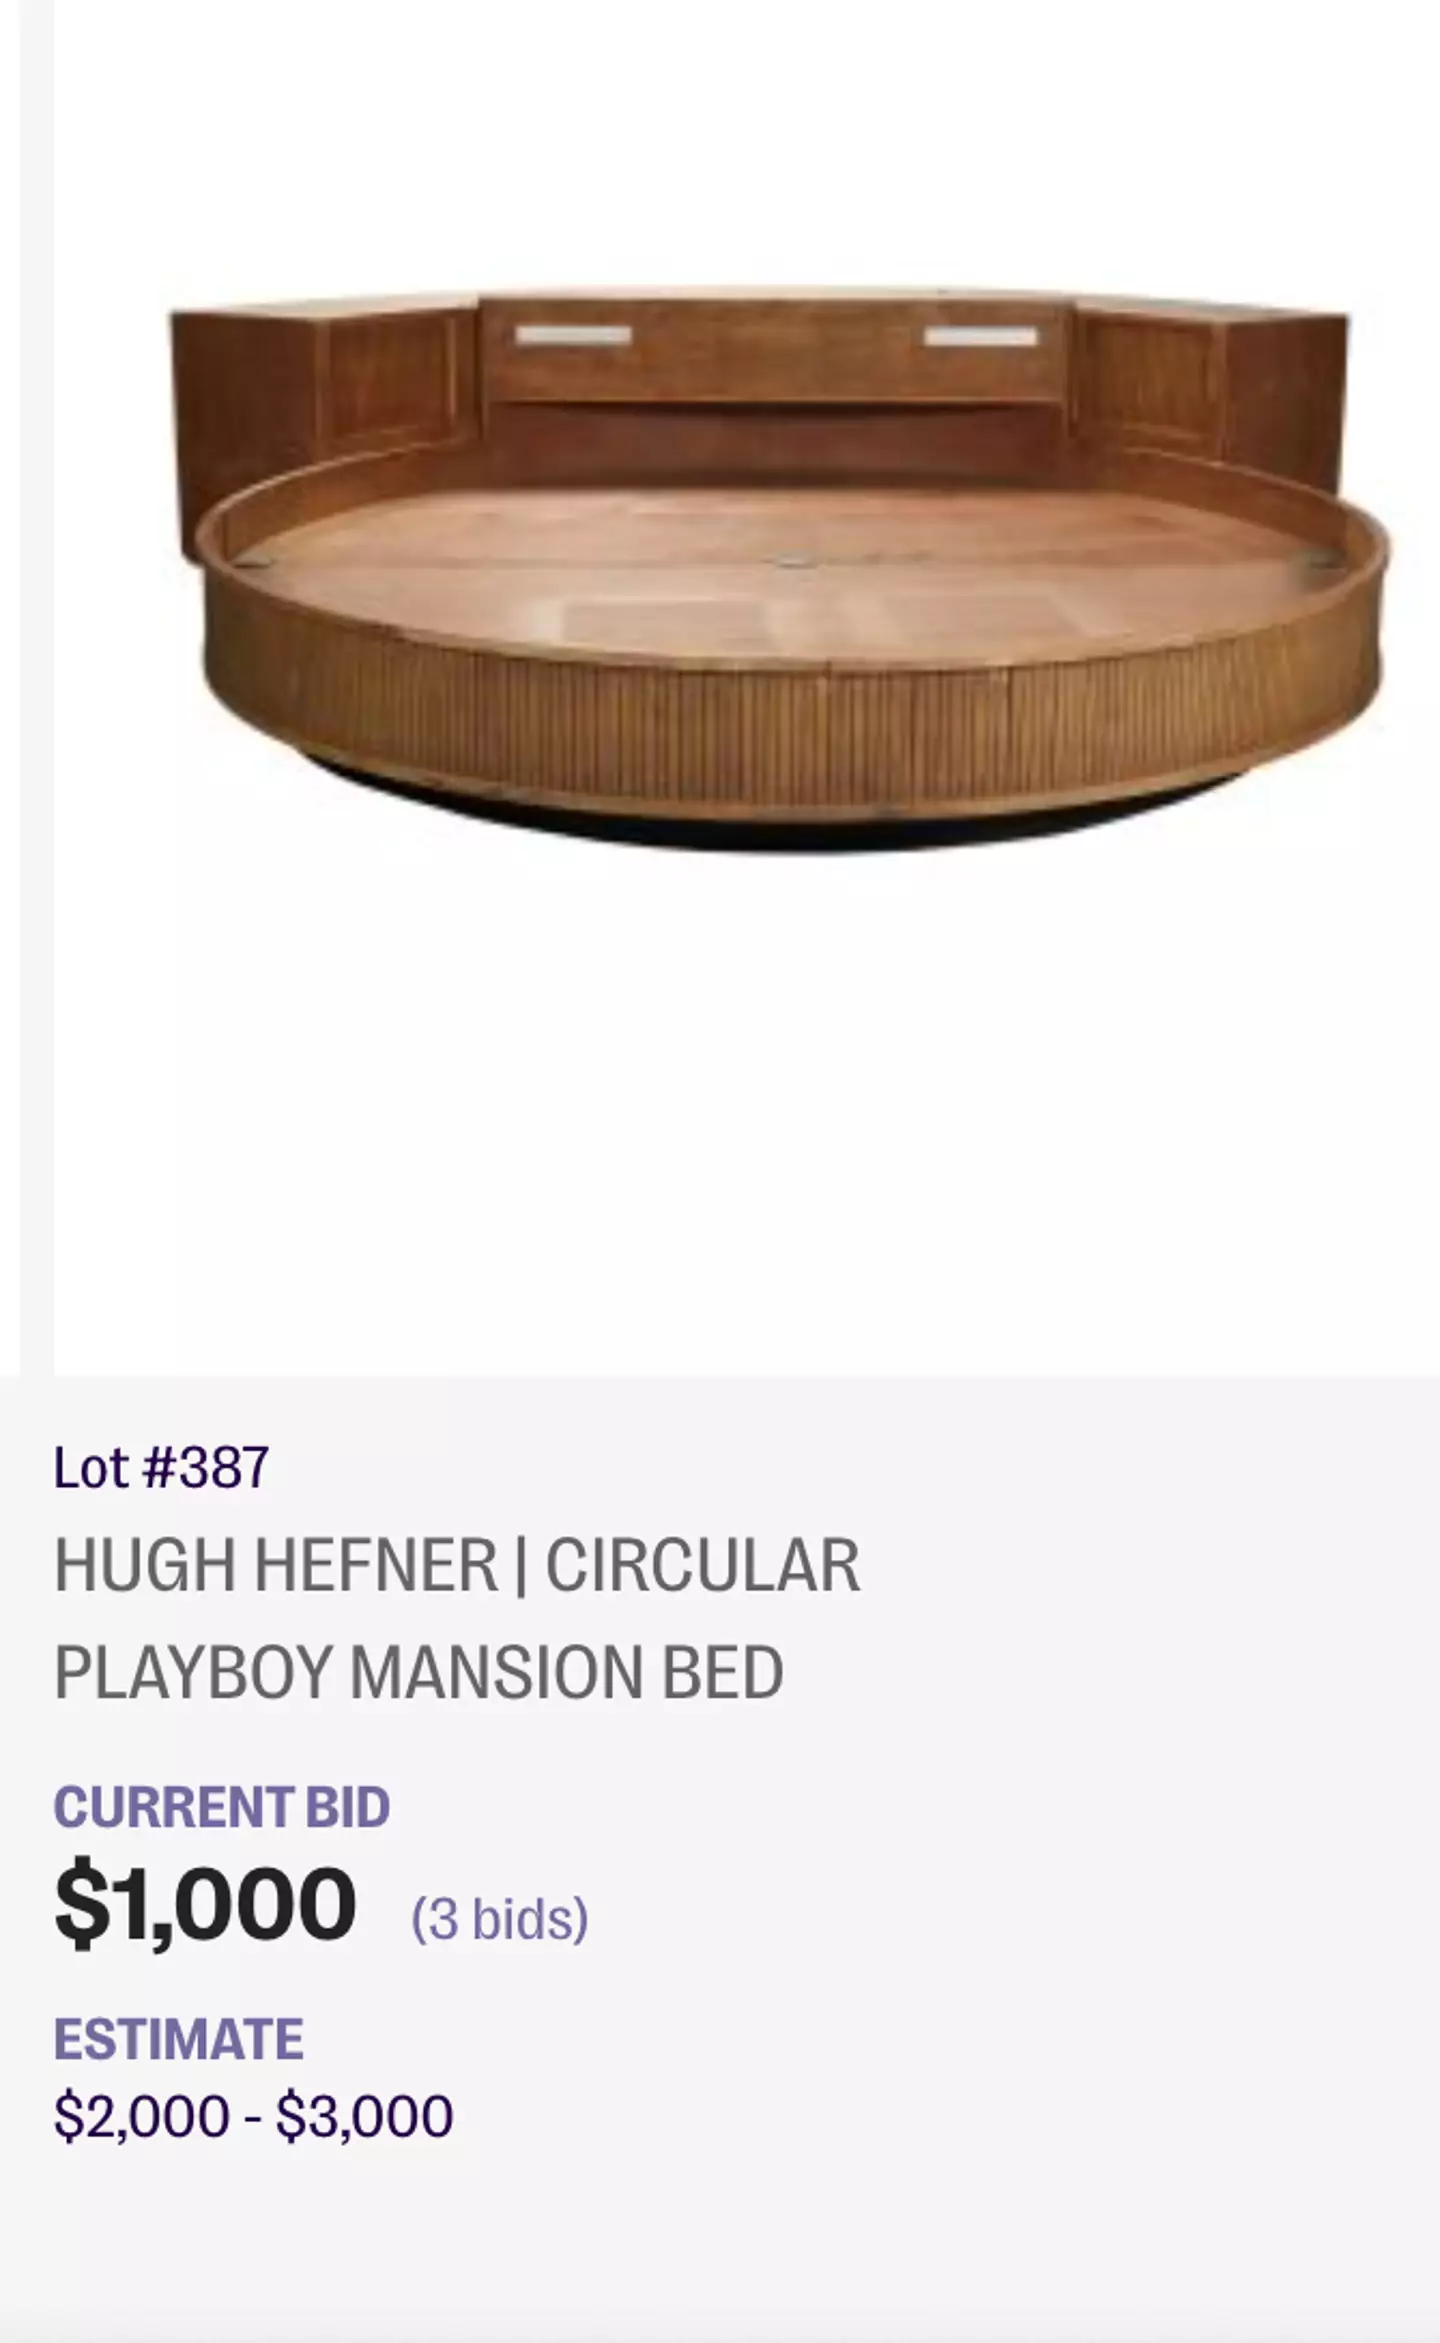 Hefner's Playboy bed is listed too.